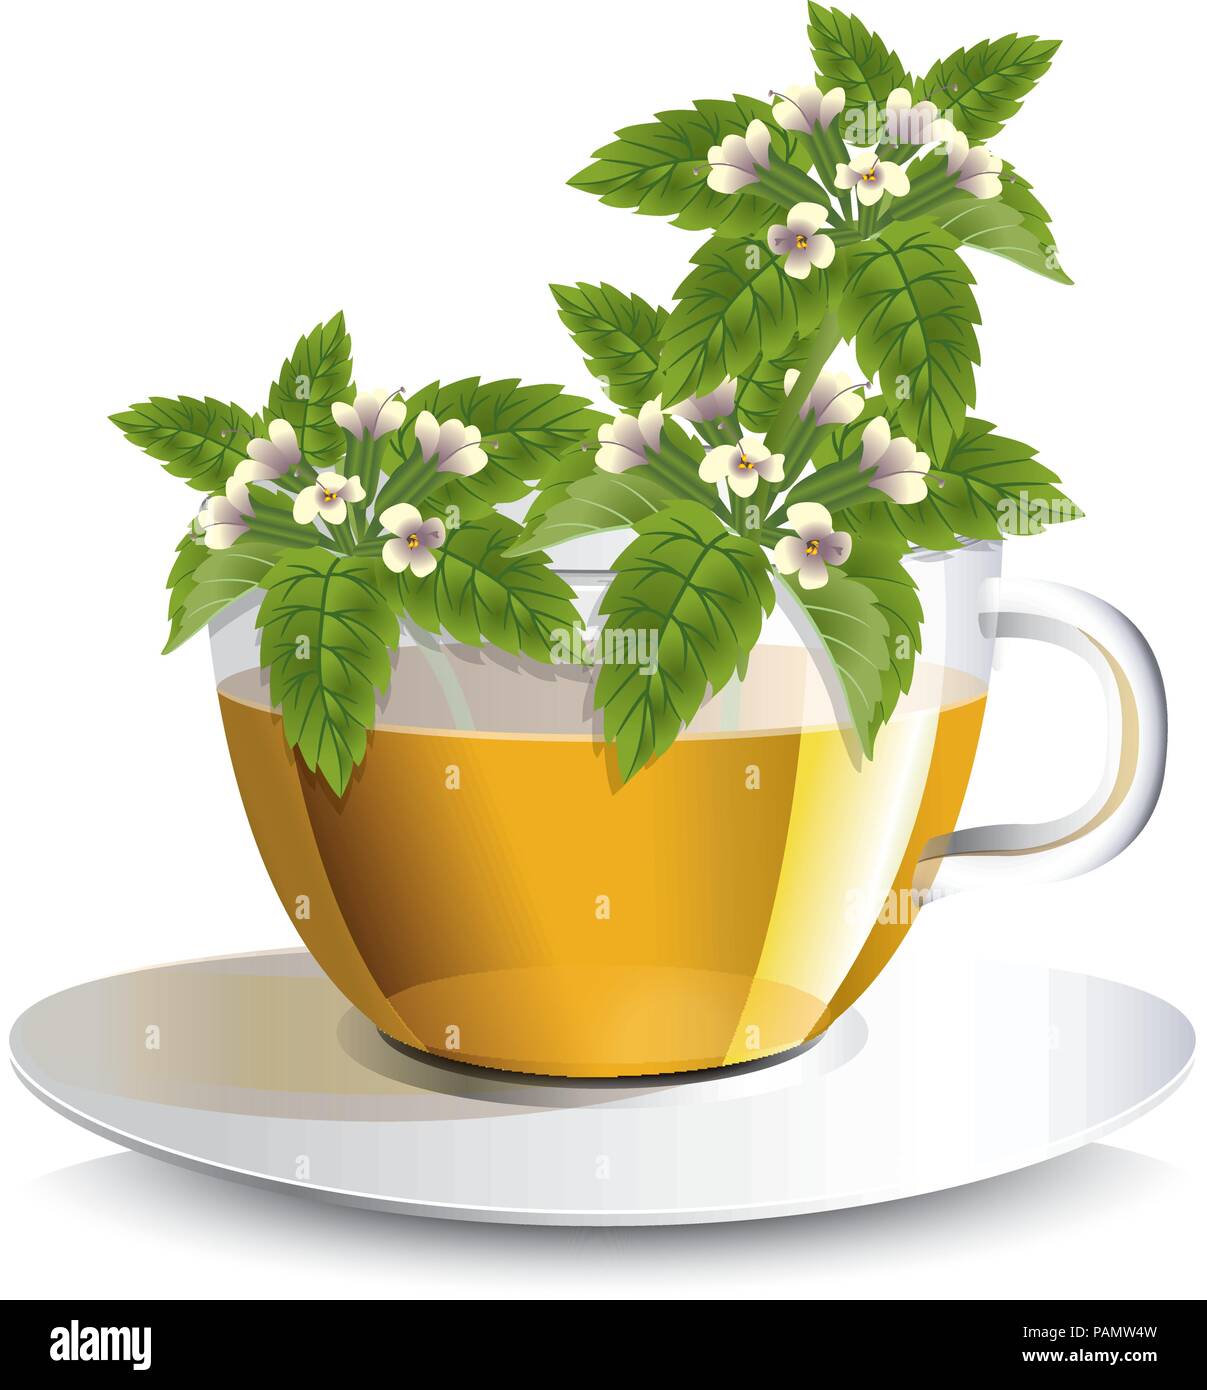 Vector Illustration Lemon Balm Tea In A Transparent Cup With Flowers A Conceptual Idea For The Label Stock Vector Image Art Alamy